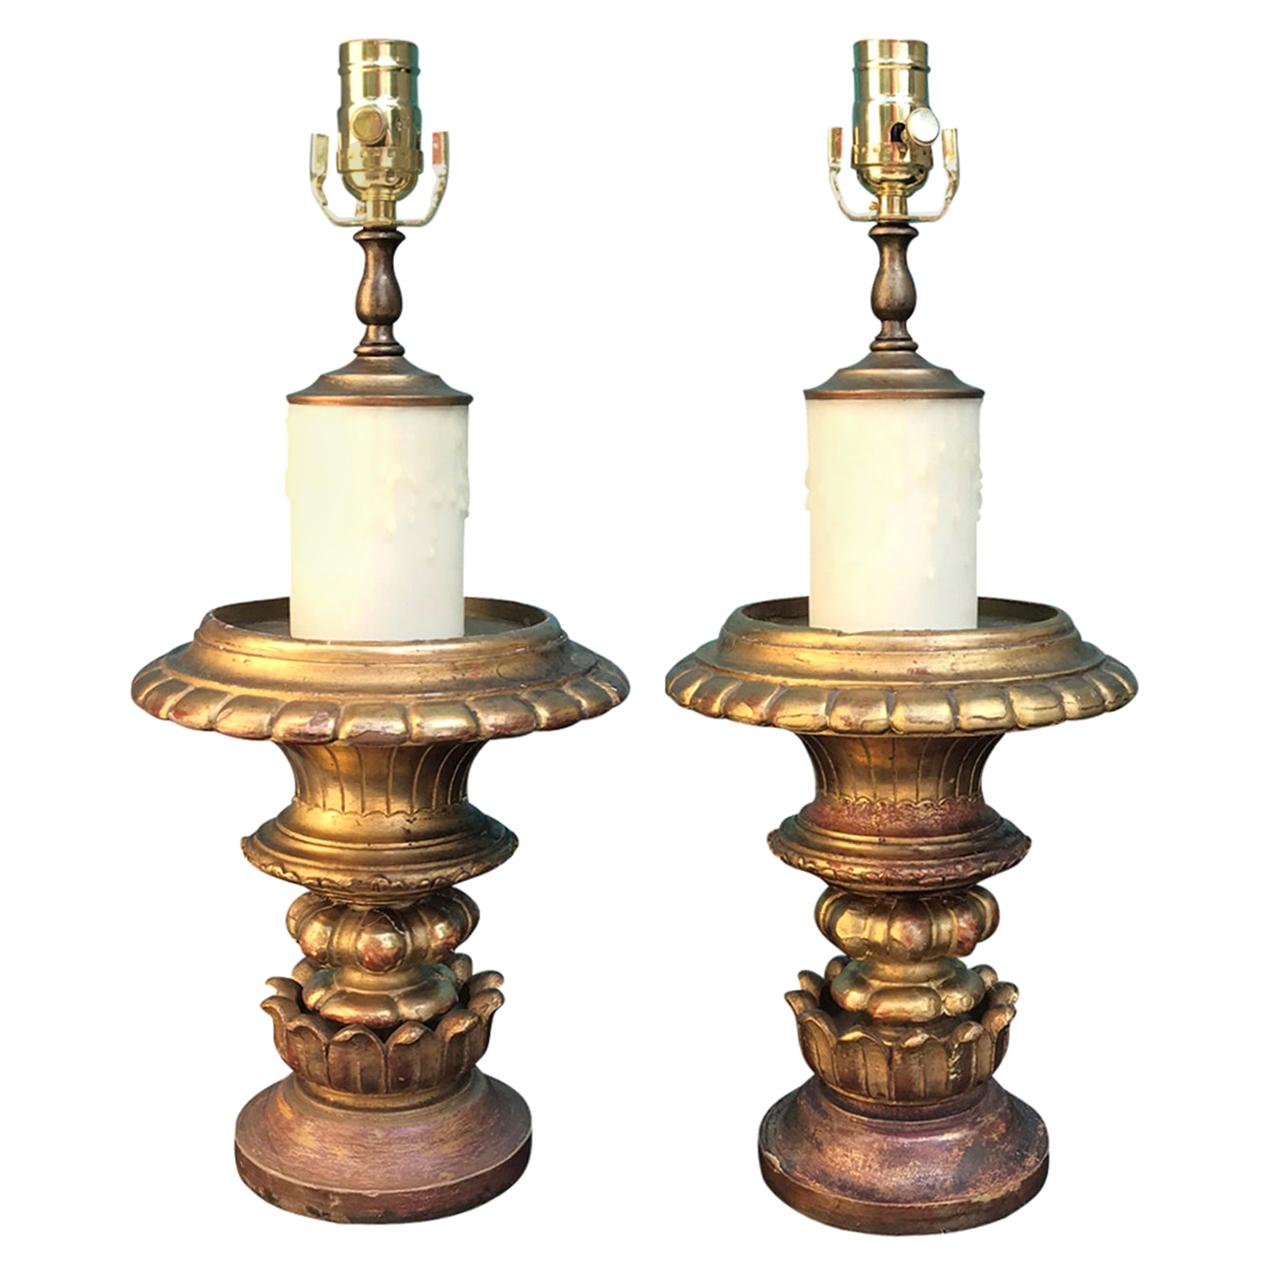 Pair of 19th Century Giltwood and Gesso Urns as Lamps